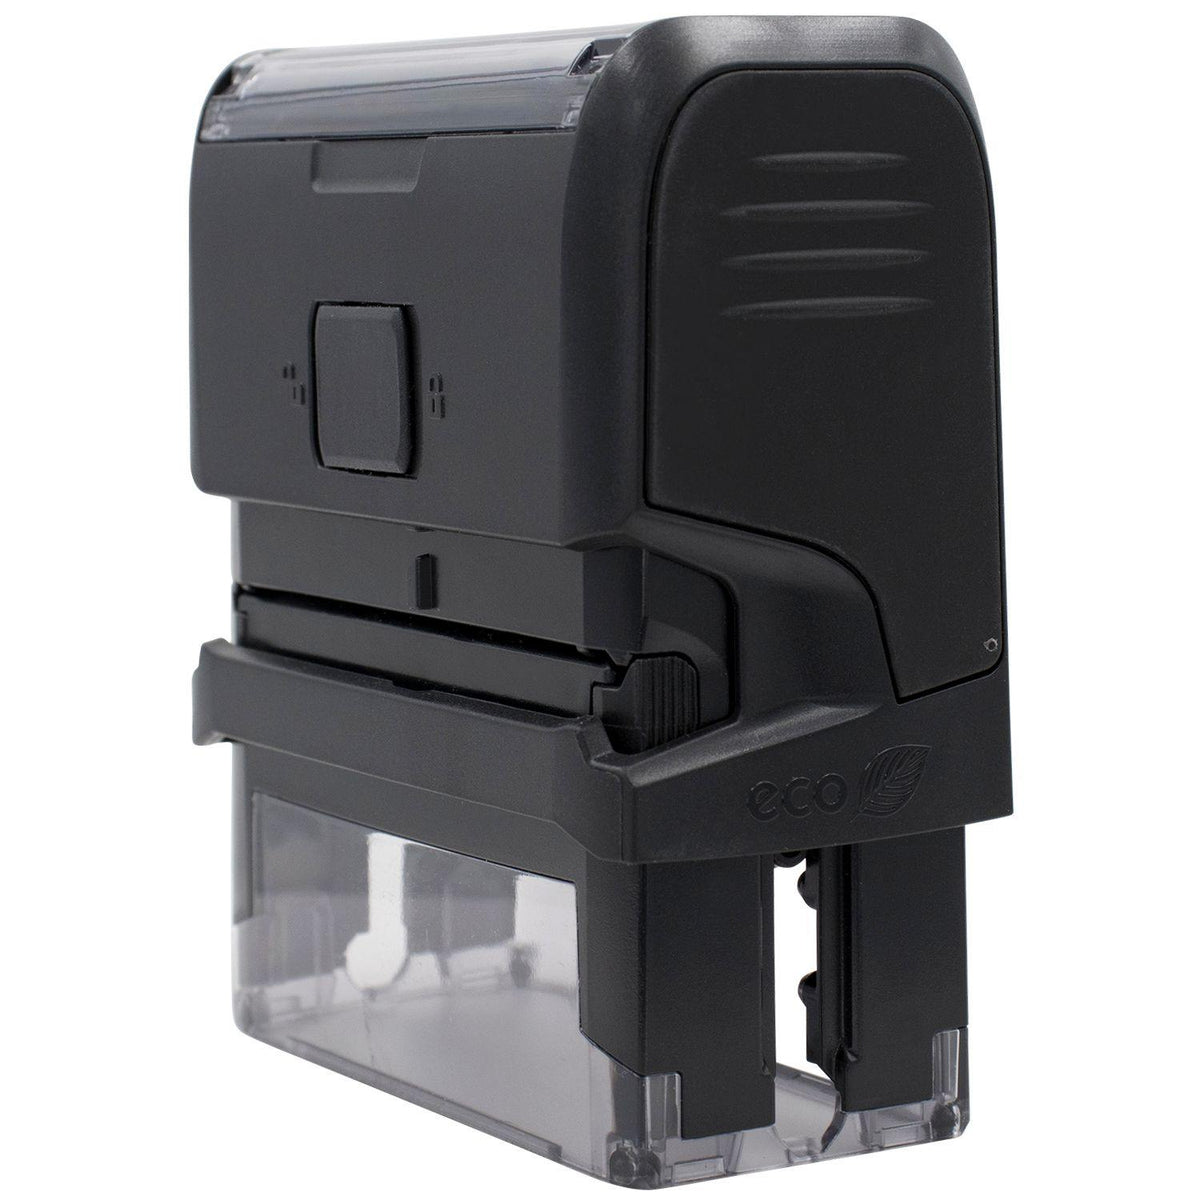 Self Inking Diabetic Stamp - Engineer Seal Stamps - Brand_Trodat, Impression Size_Small, Stamp Type_Self-Inking Stamp, Type of Use_Medical Office